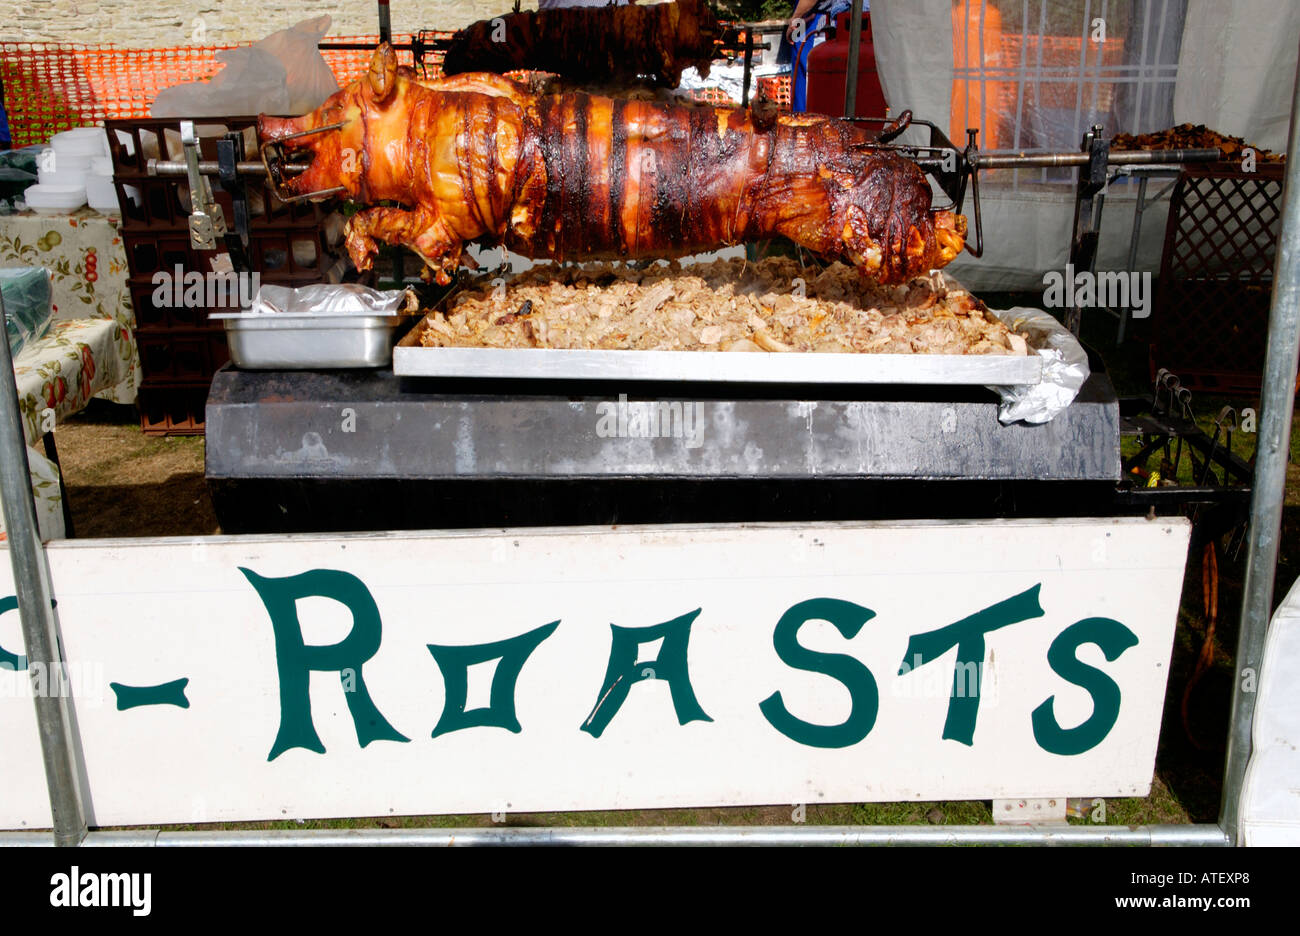 Whole spit roast pig at the annual Ludlow Food Festival Shropshire England UK Stock Photo